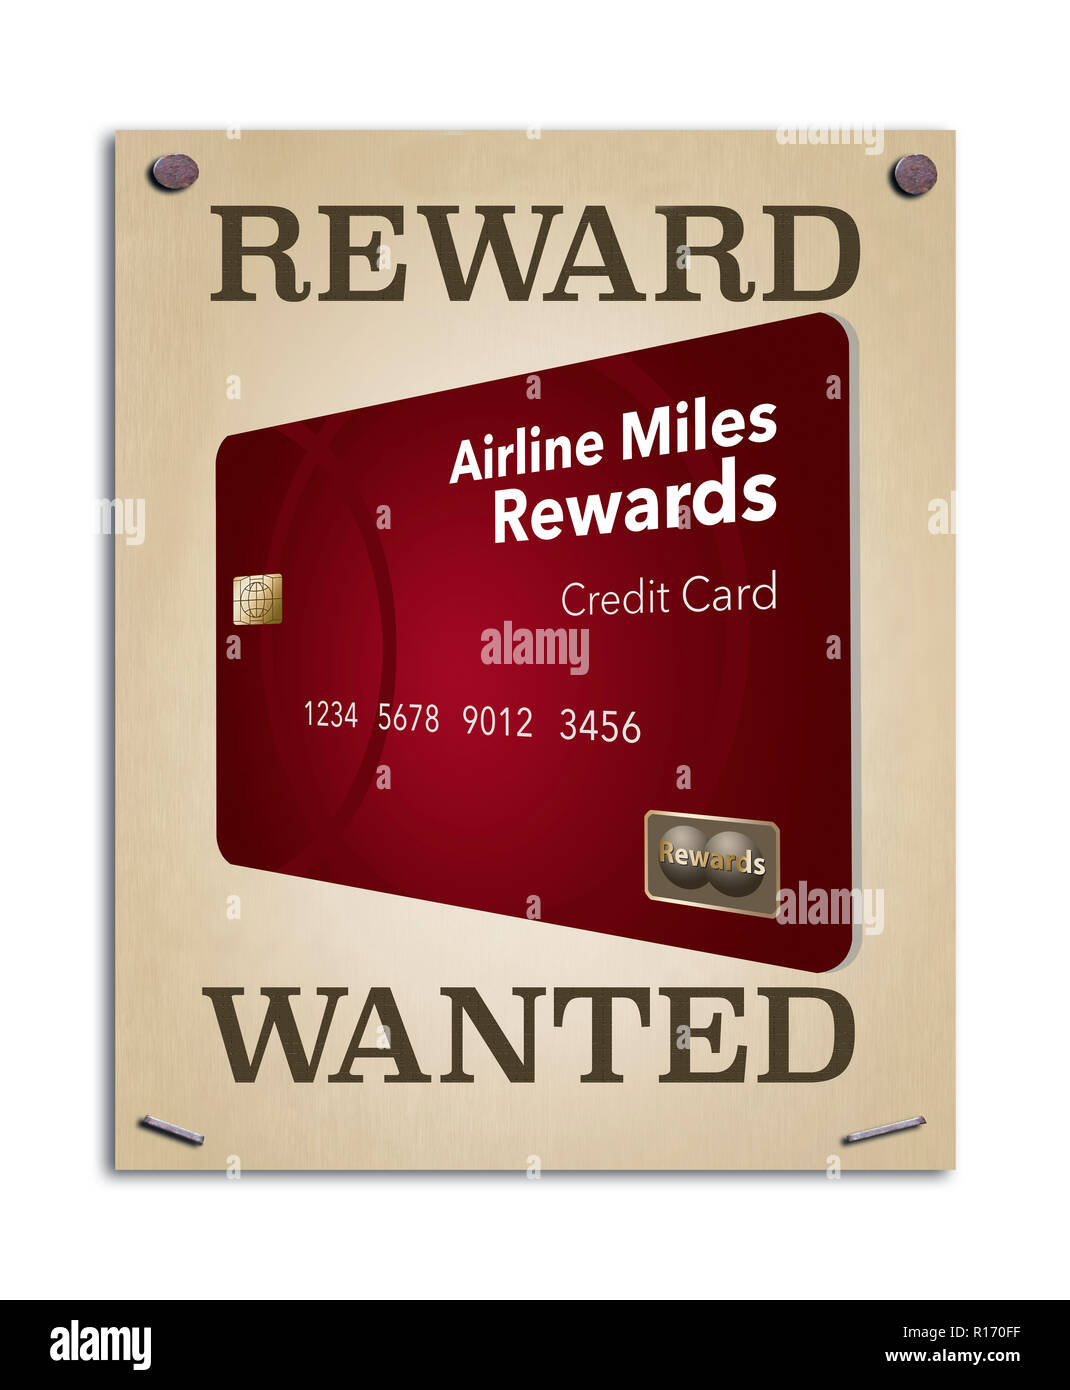 A wanted poster promises a reward and the image on the poster is an airline miles rewards credit card. This is an illustration. Stock Photo